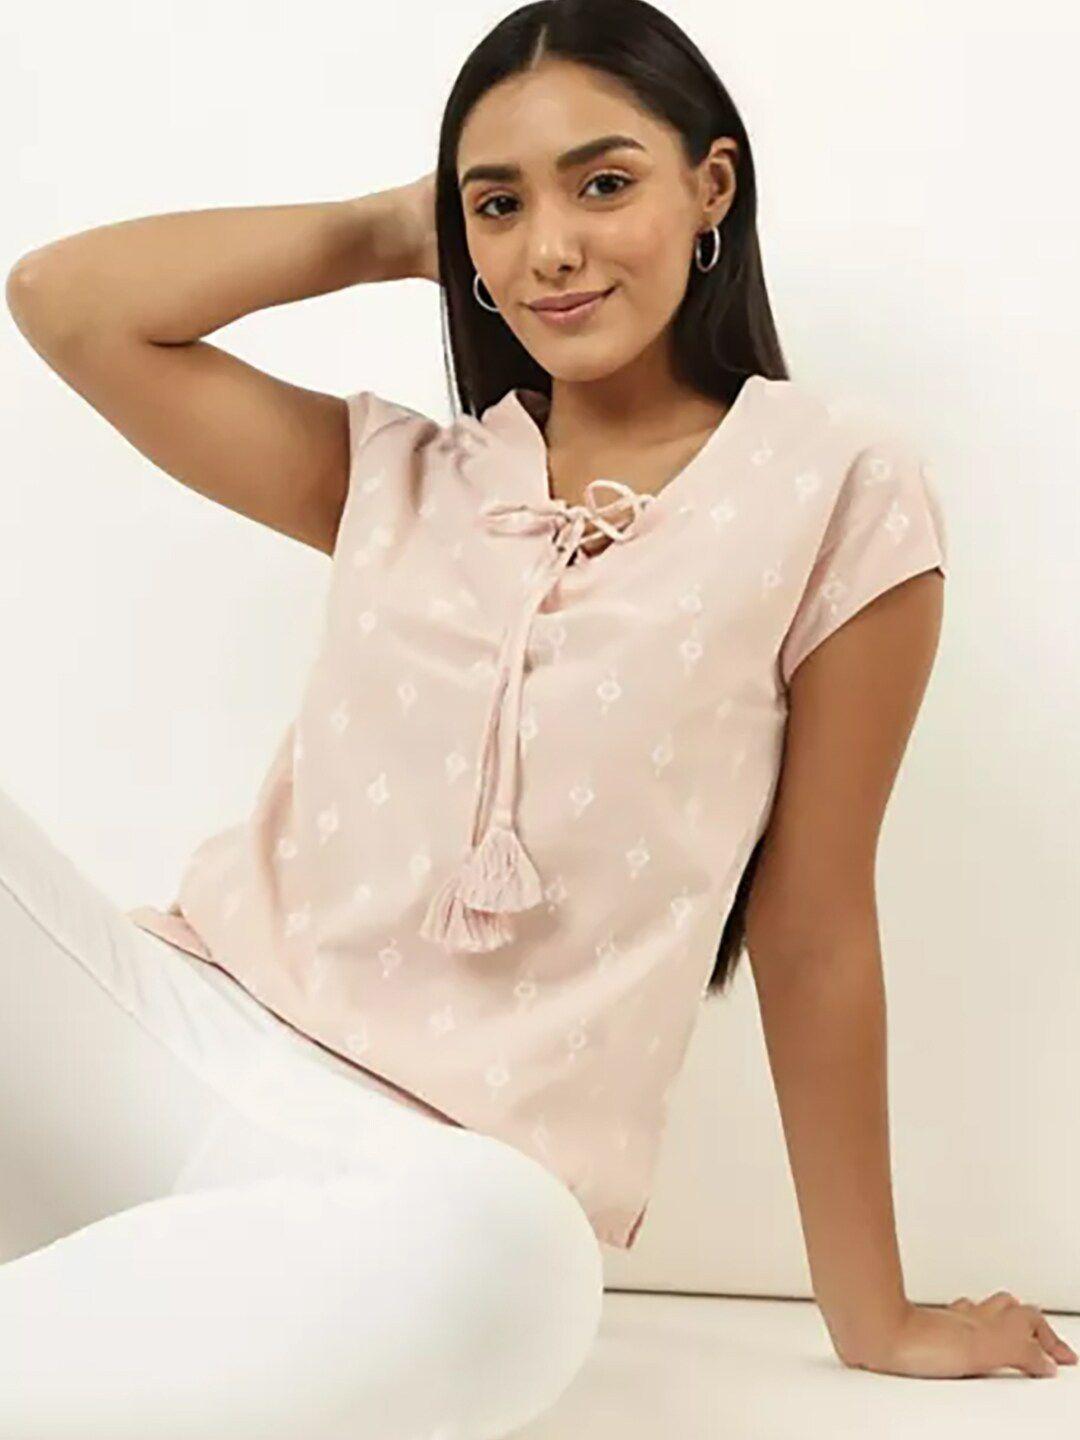 marks-&-spencer-women-pink-&-white-print-tie-up-neck-top